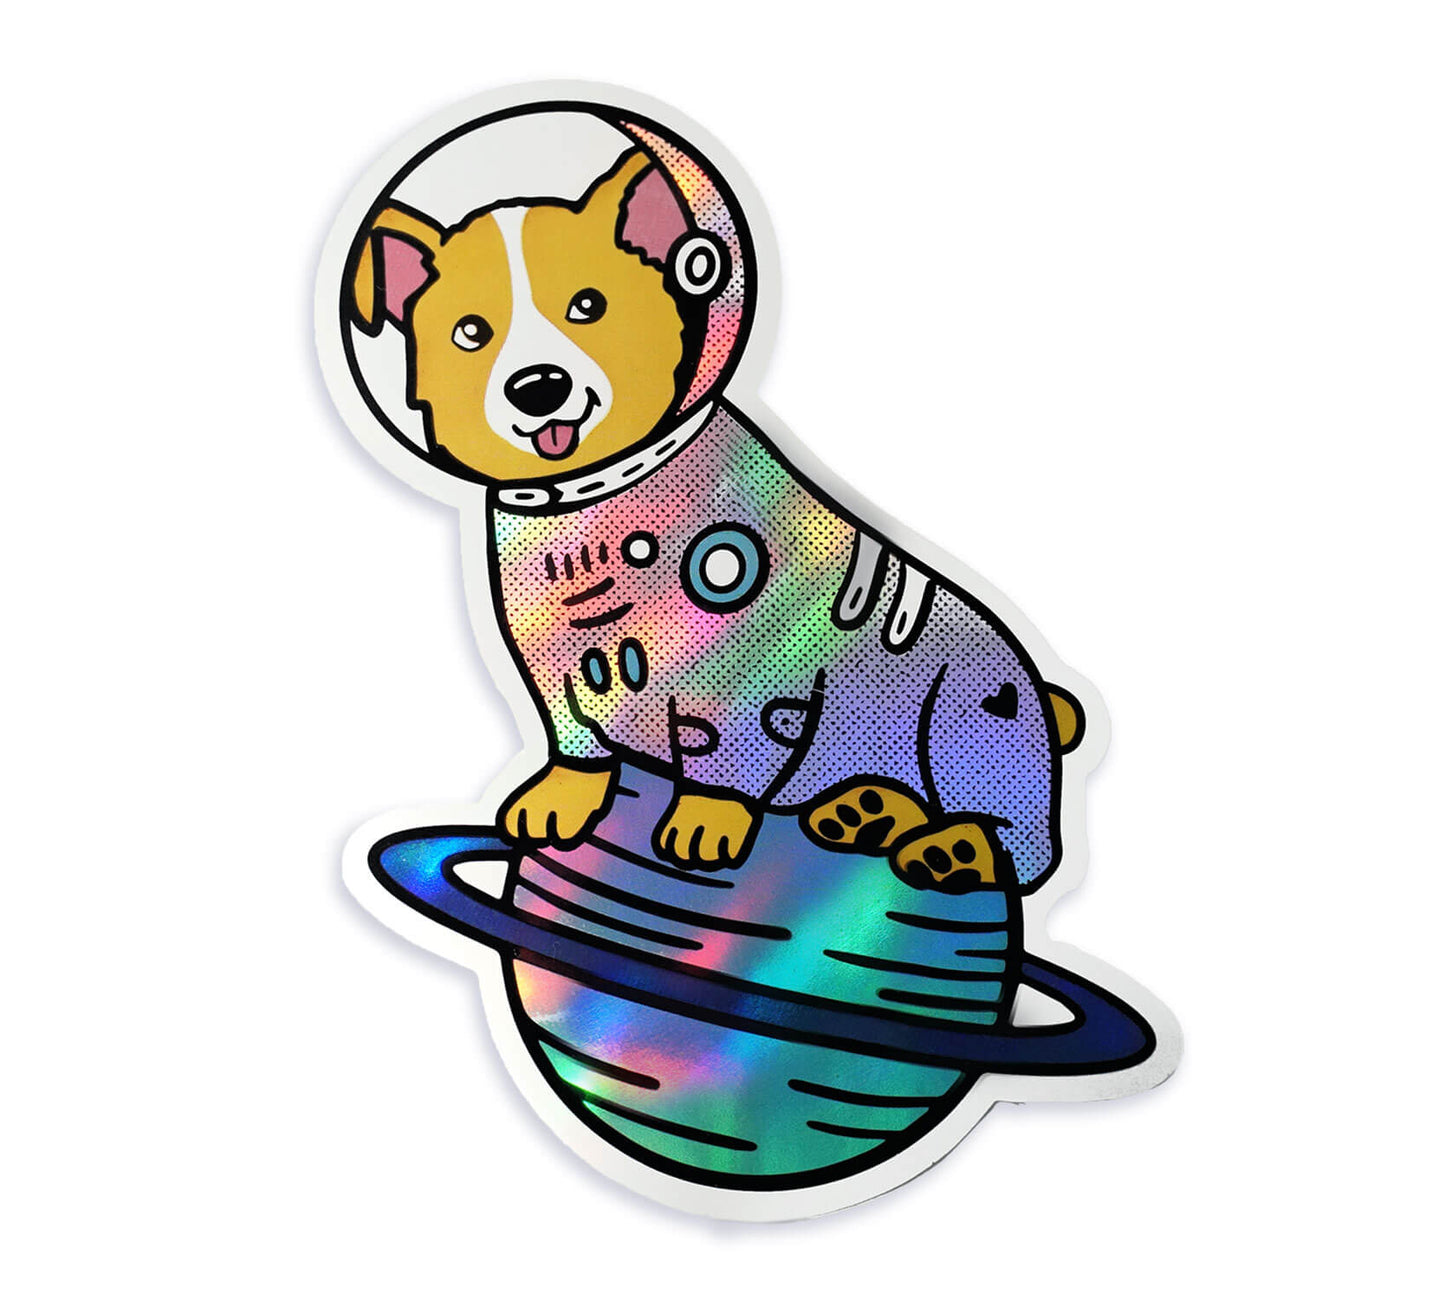 space corgi sticker compoco holographic waterproof quality cute dog dogs doggo pup puppy puppers puppies heart happiness spark joy stationary gift astronaut happiness unique